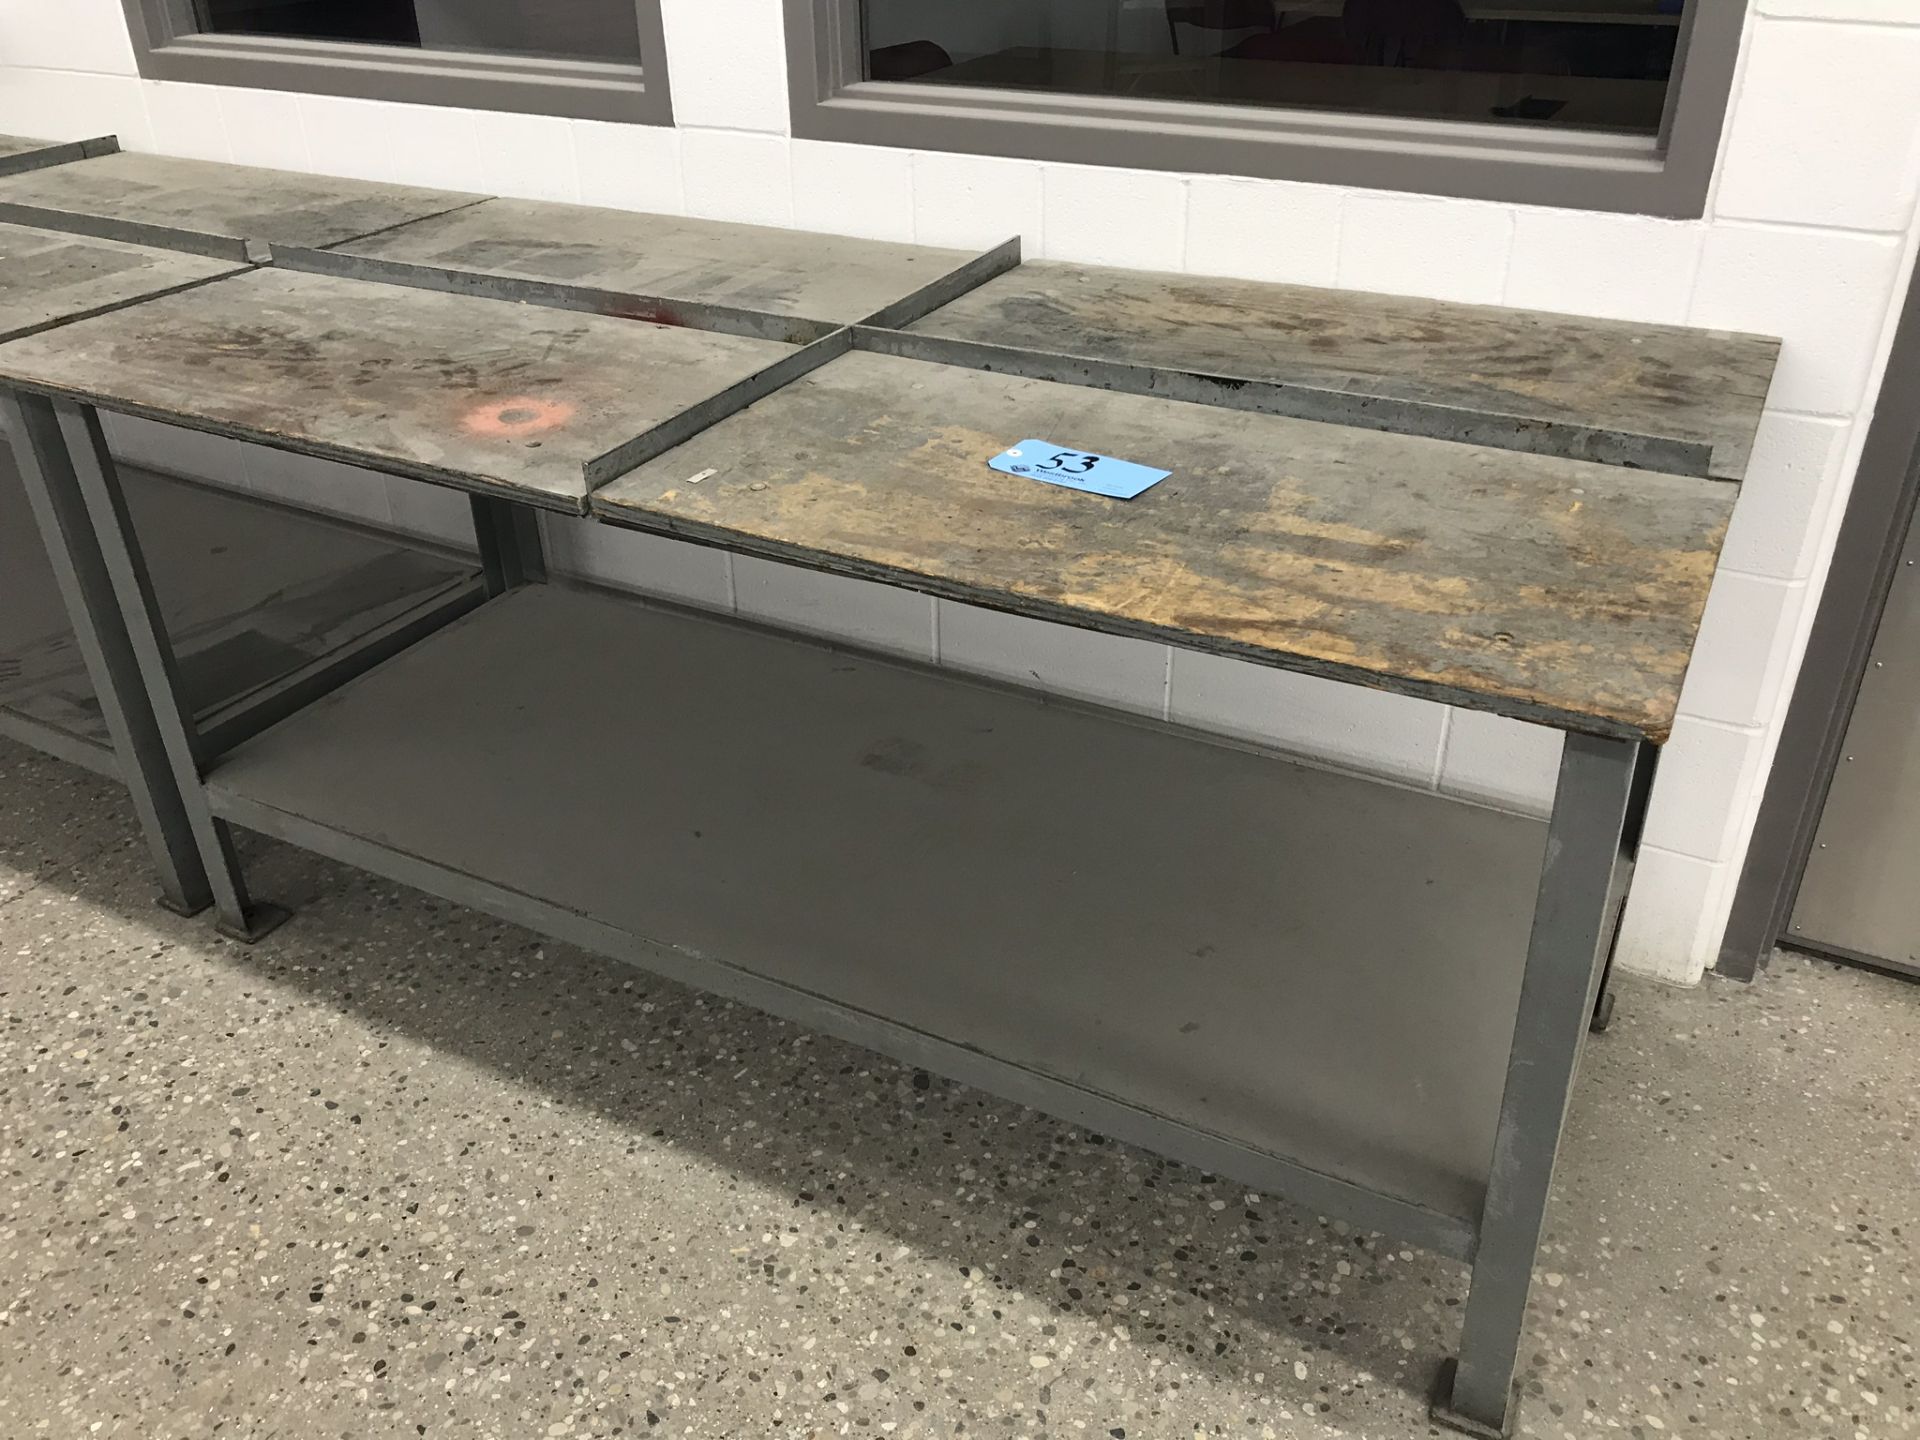 Heavy Duty Steel Work Bench with Wood Top, estimated load capacity of 2,000 pounds. 6' x 3' x 36"